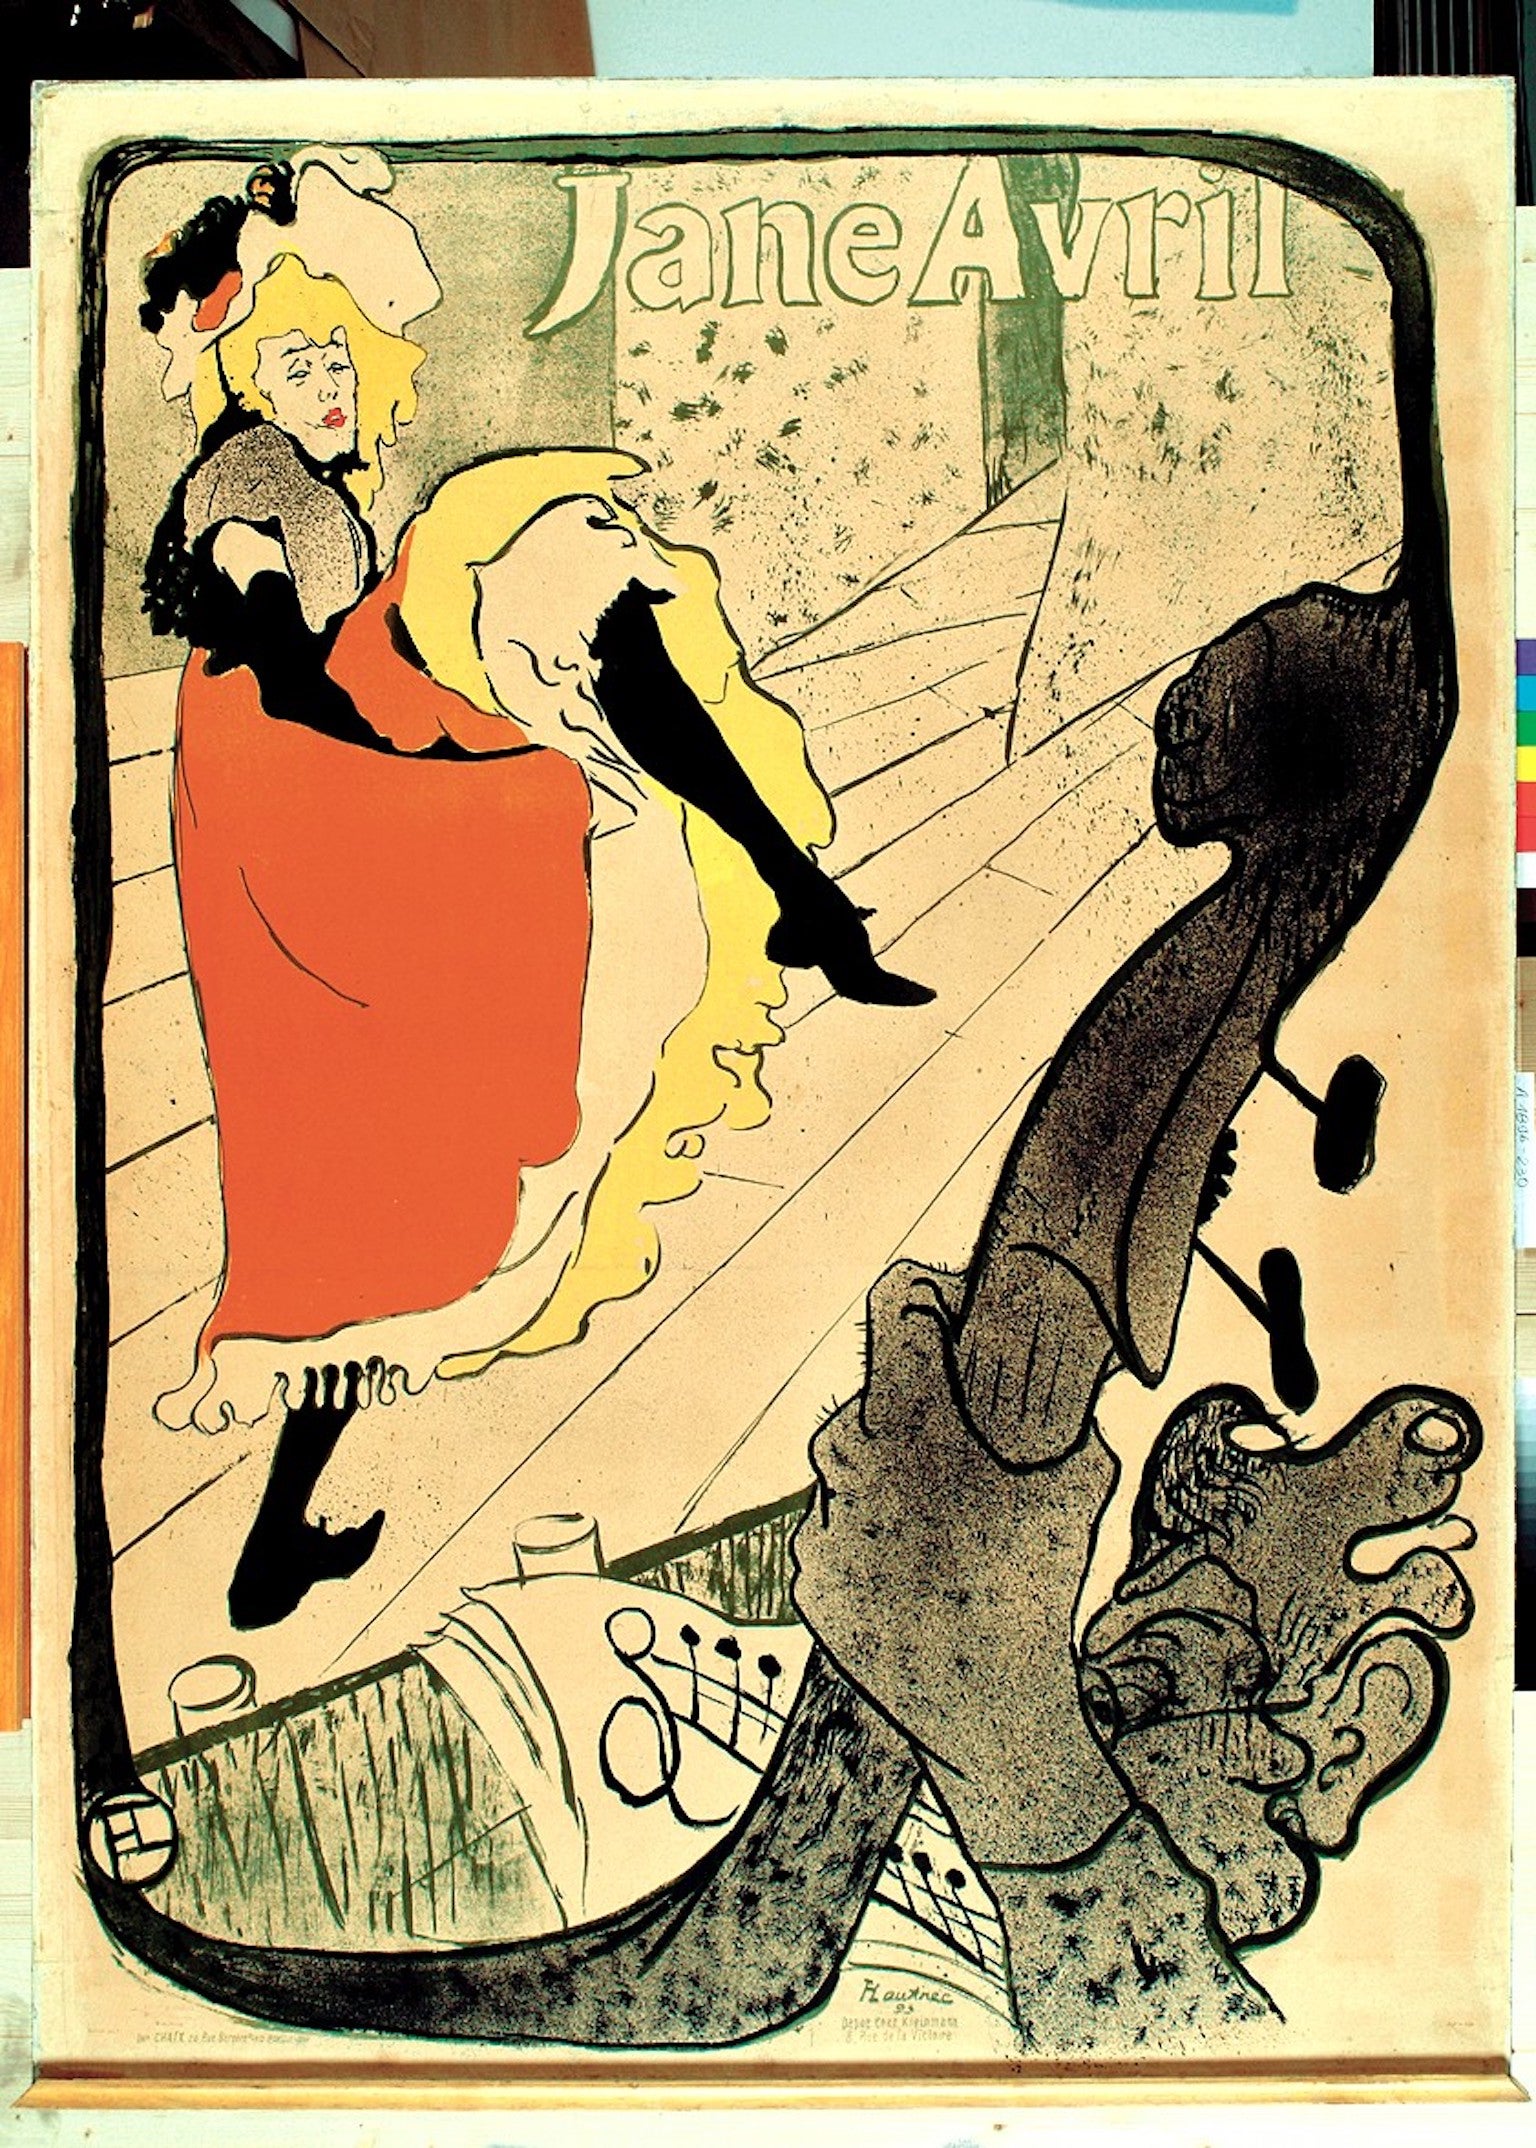 Jane Avril featured heavily in Henri de Toulouse-Lautrec’s graphic posters